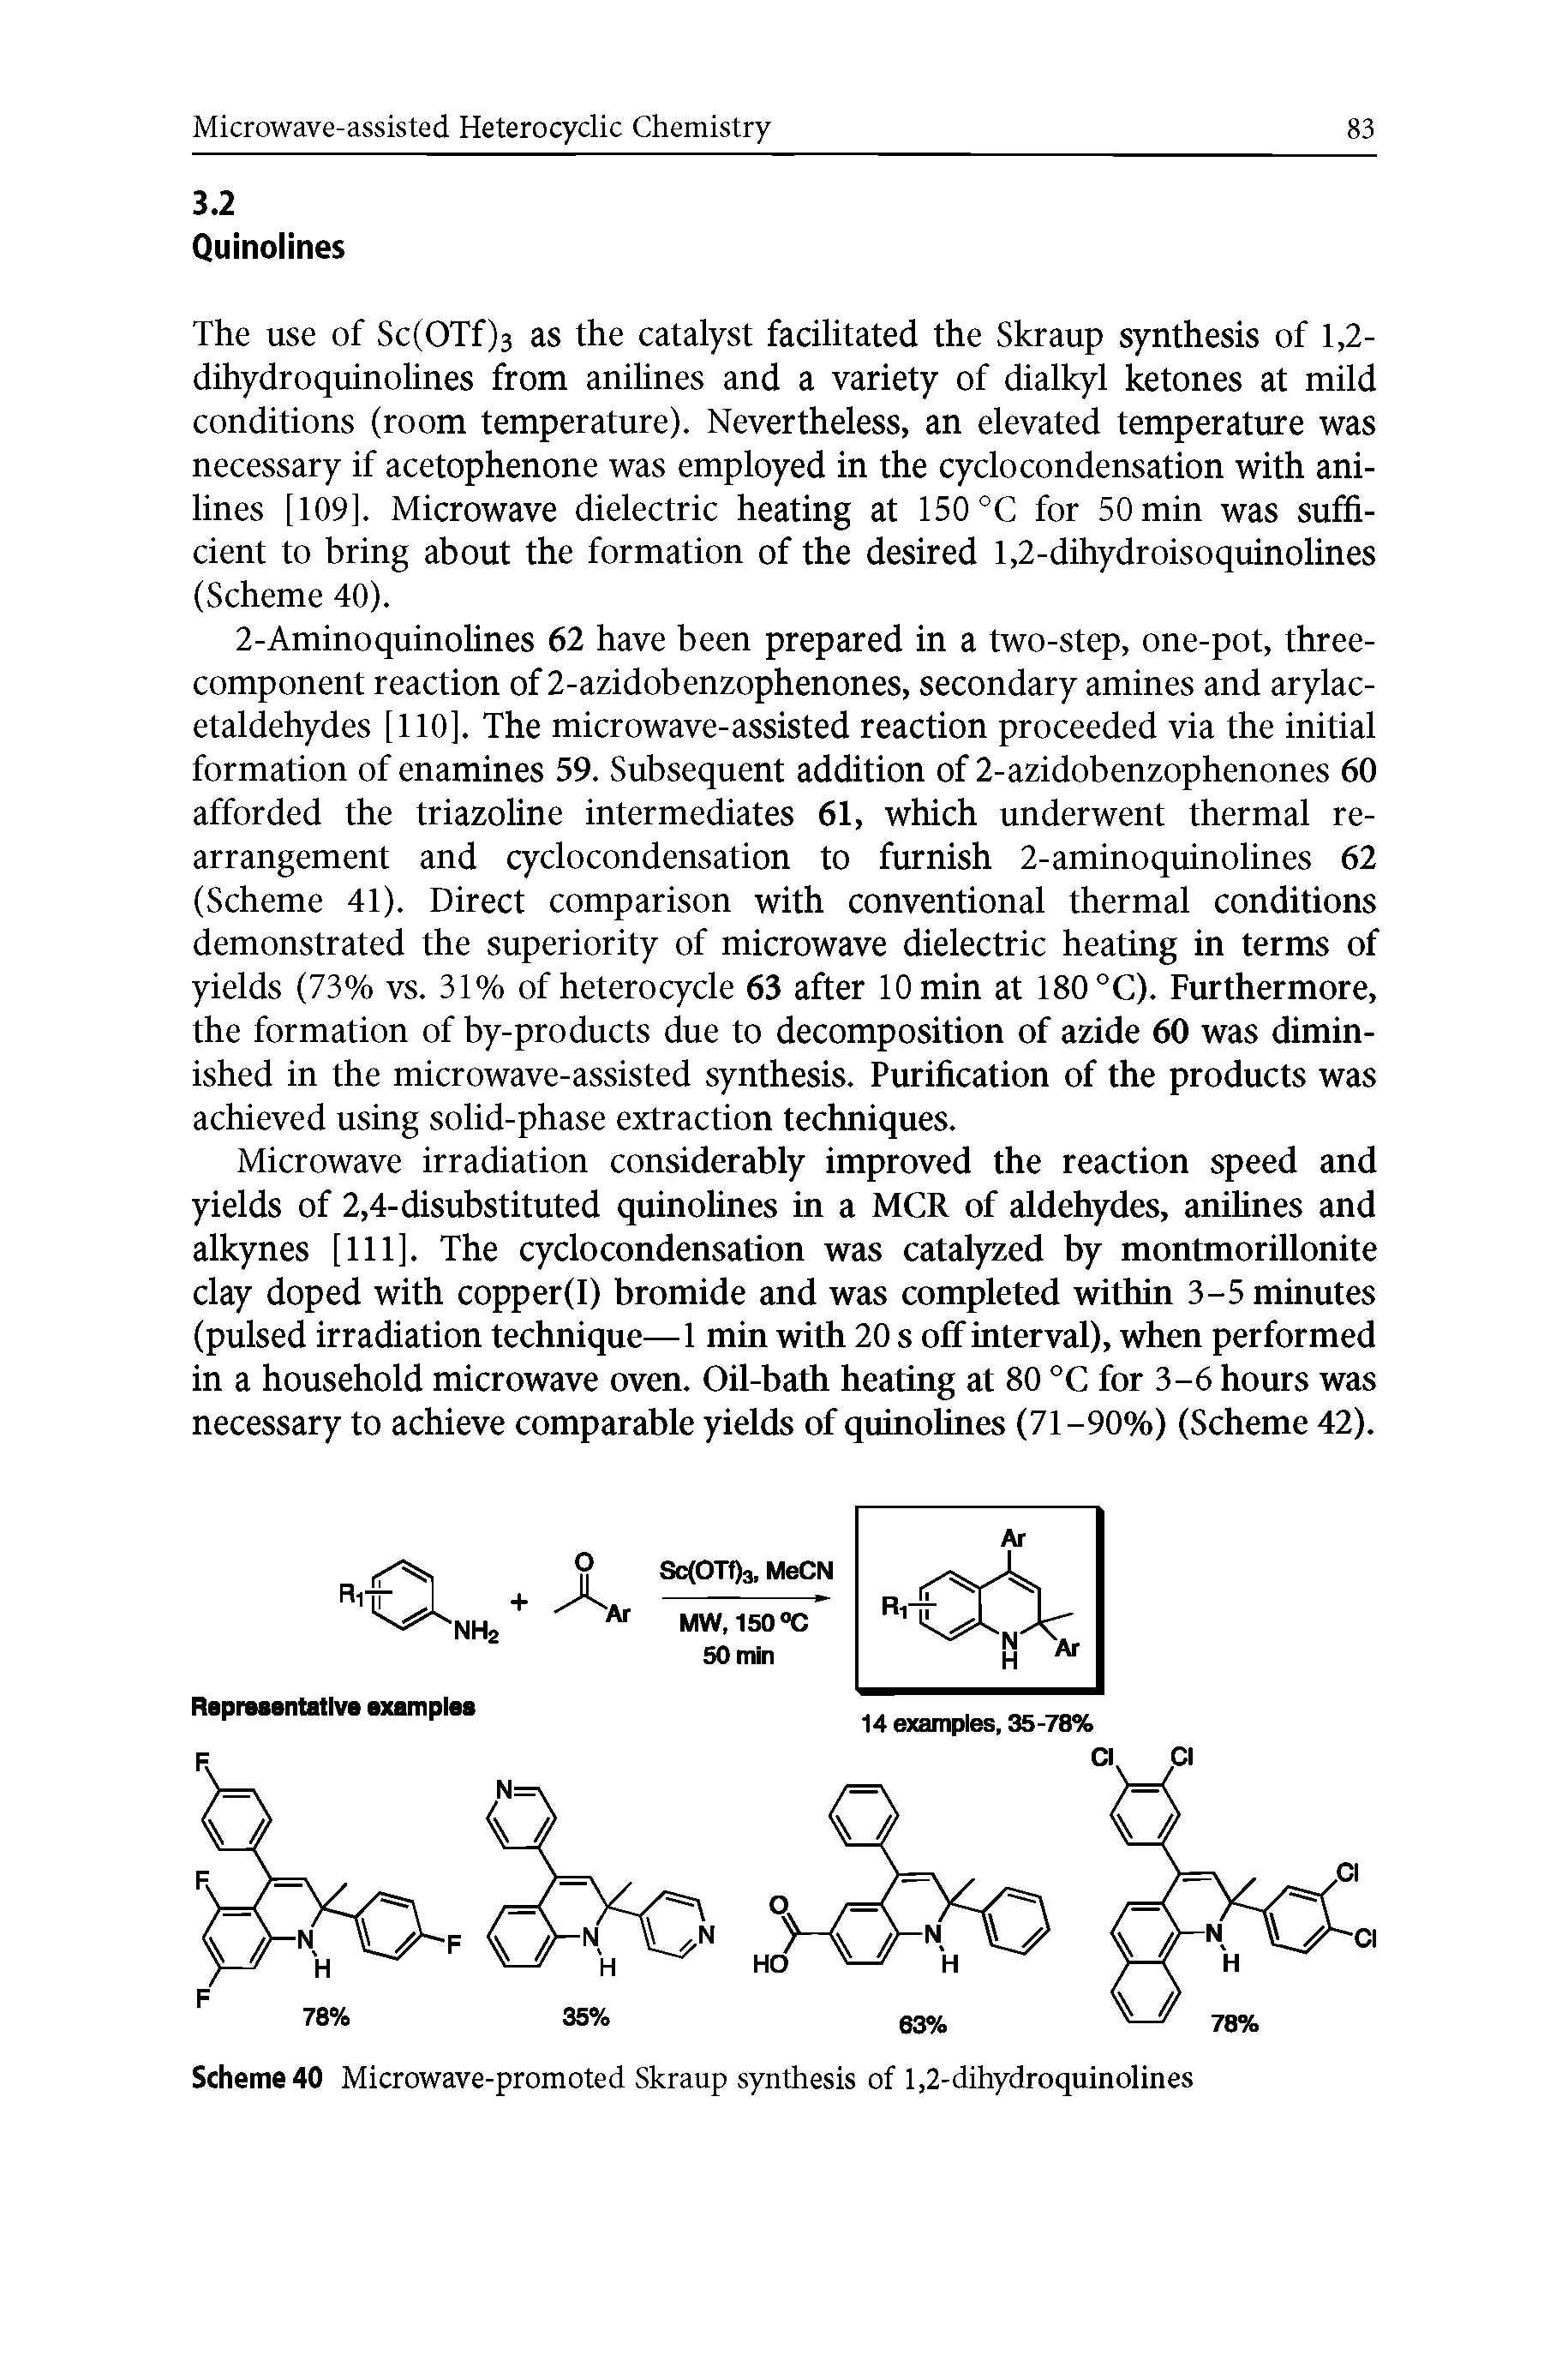 Scheme 40 Microwave-promoted Skraup synthesis of 1,2-dihydroquinolines...